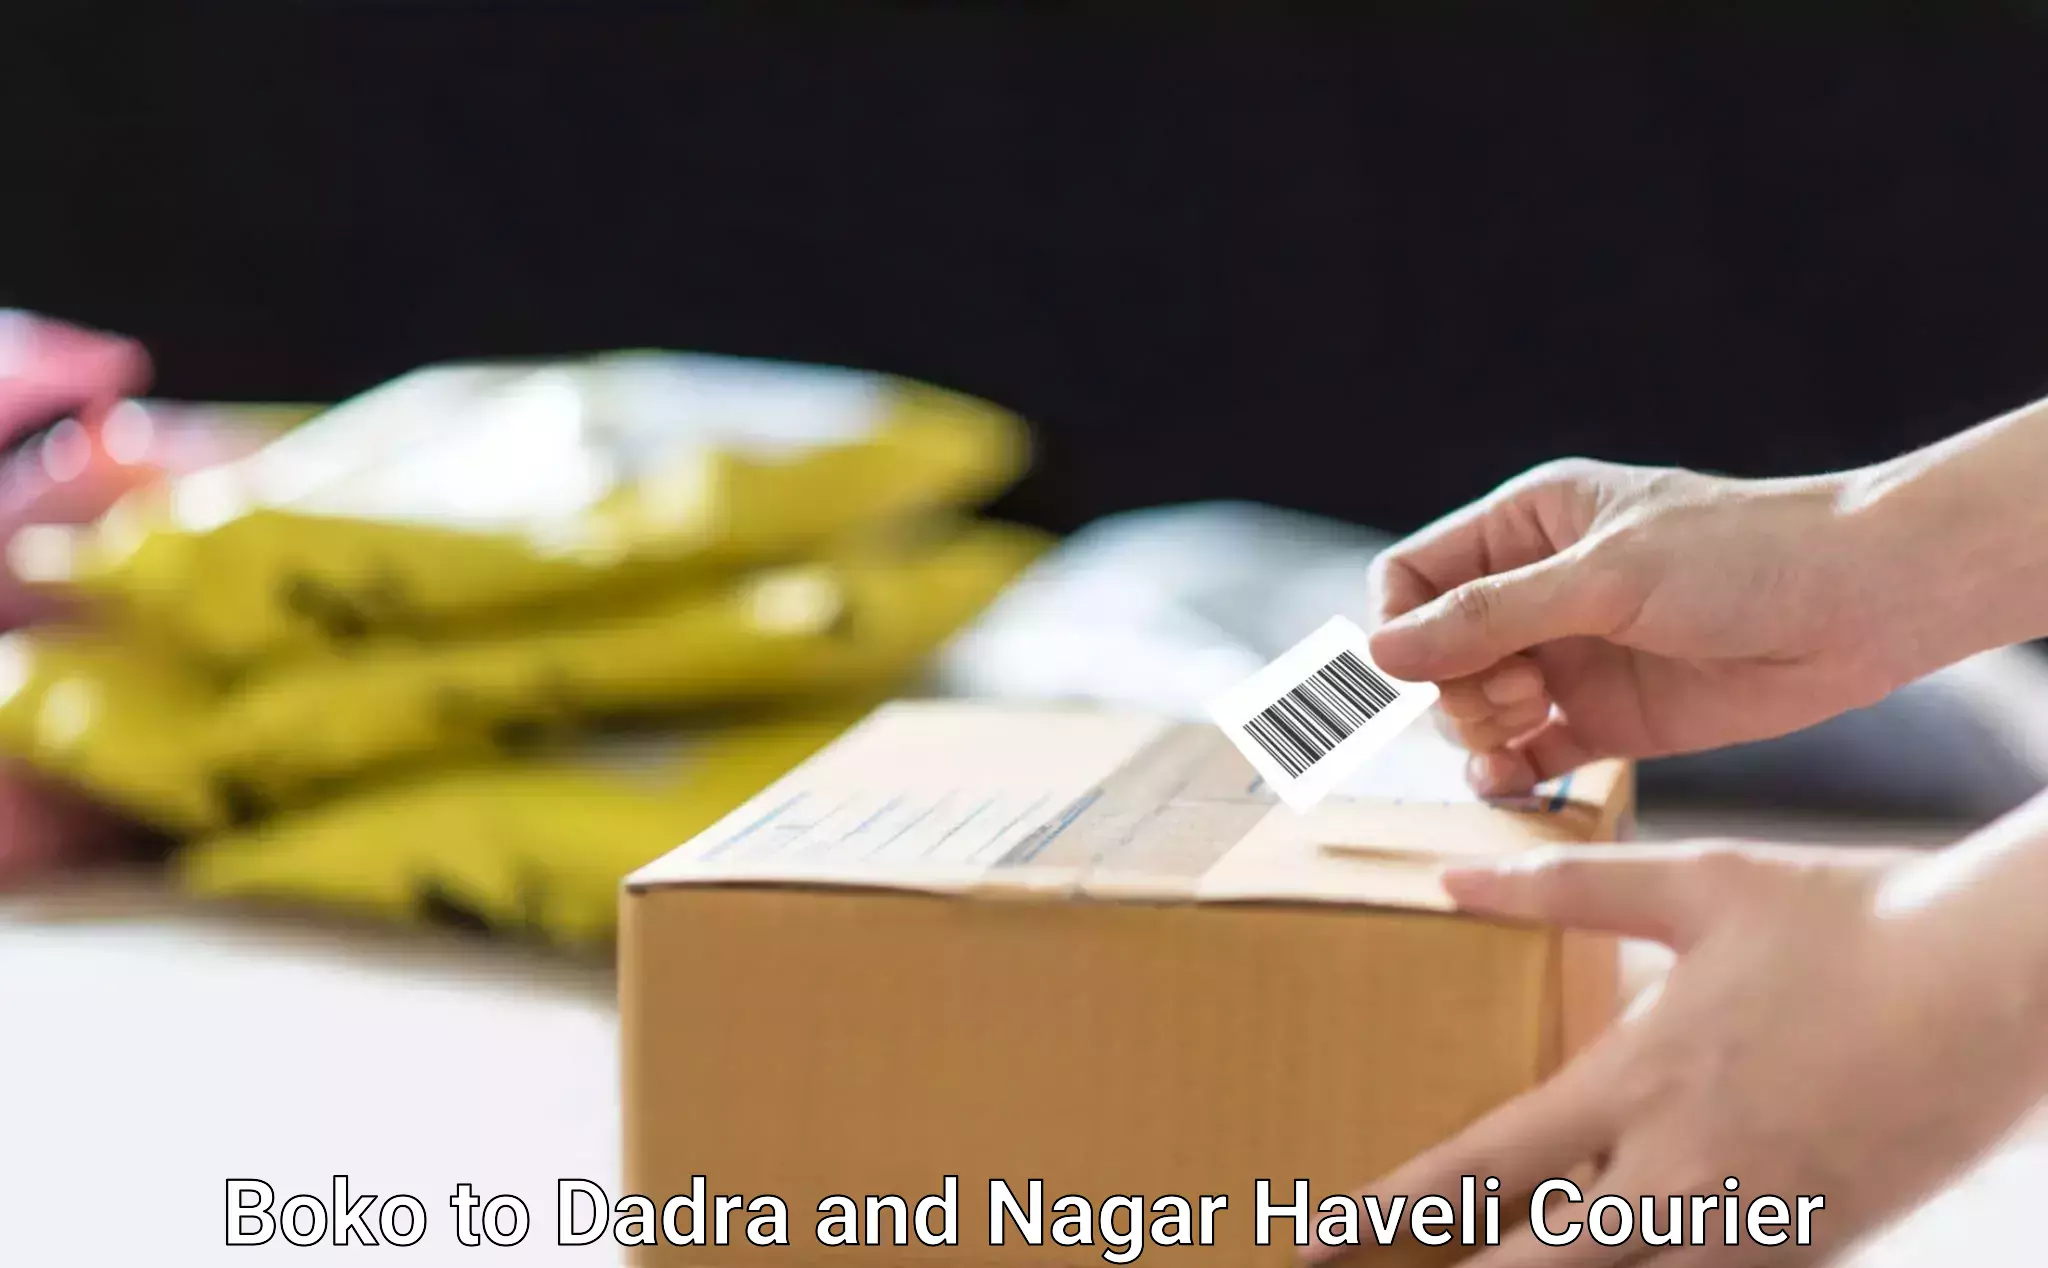 Overnight delivery services Boko to Dadra and Nagar Haveli